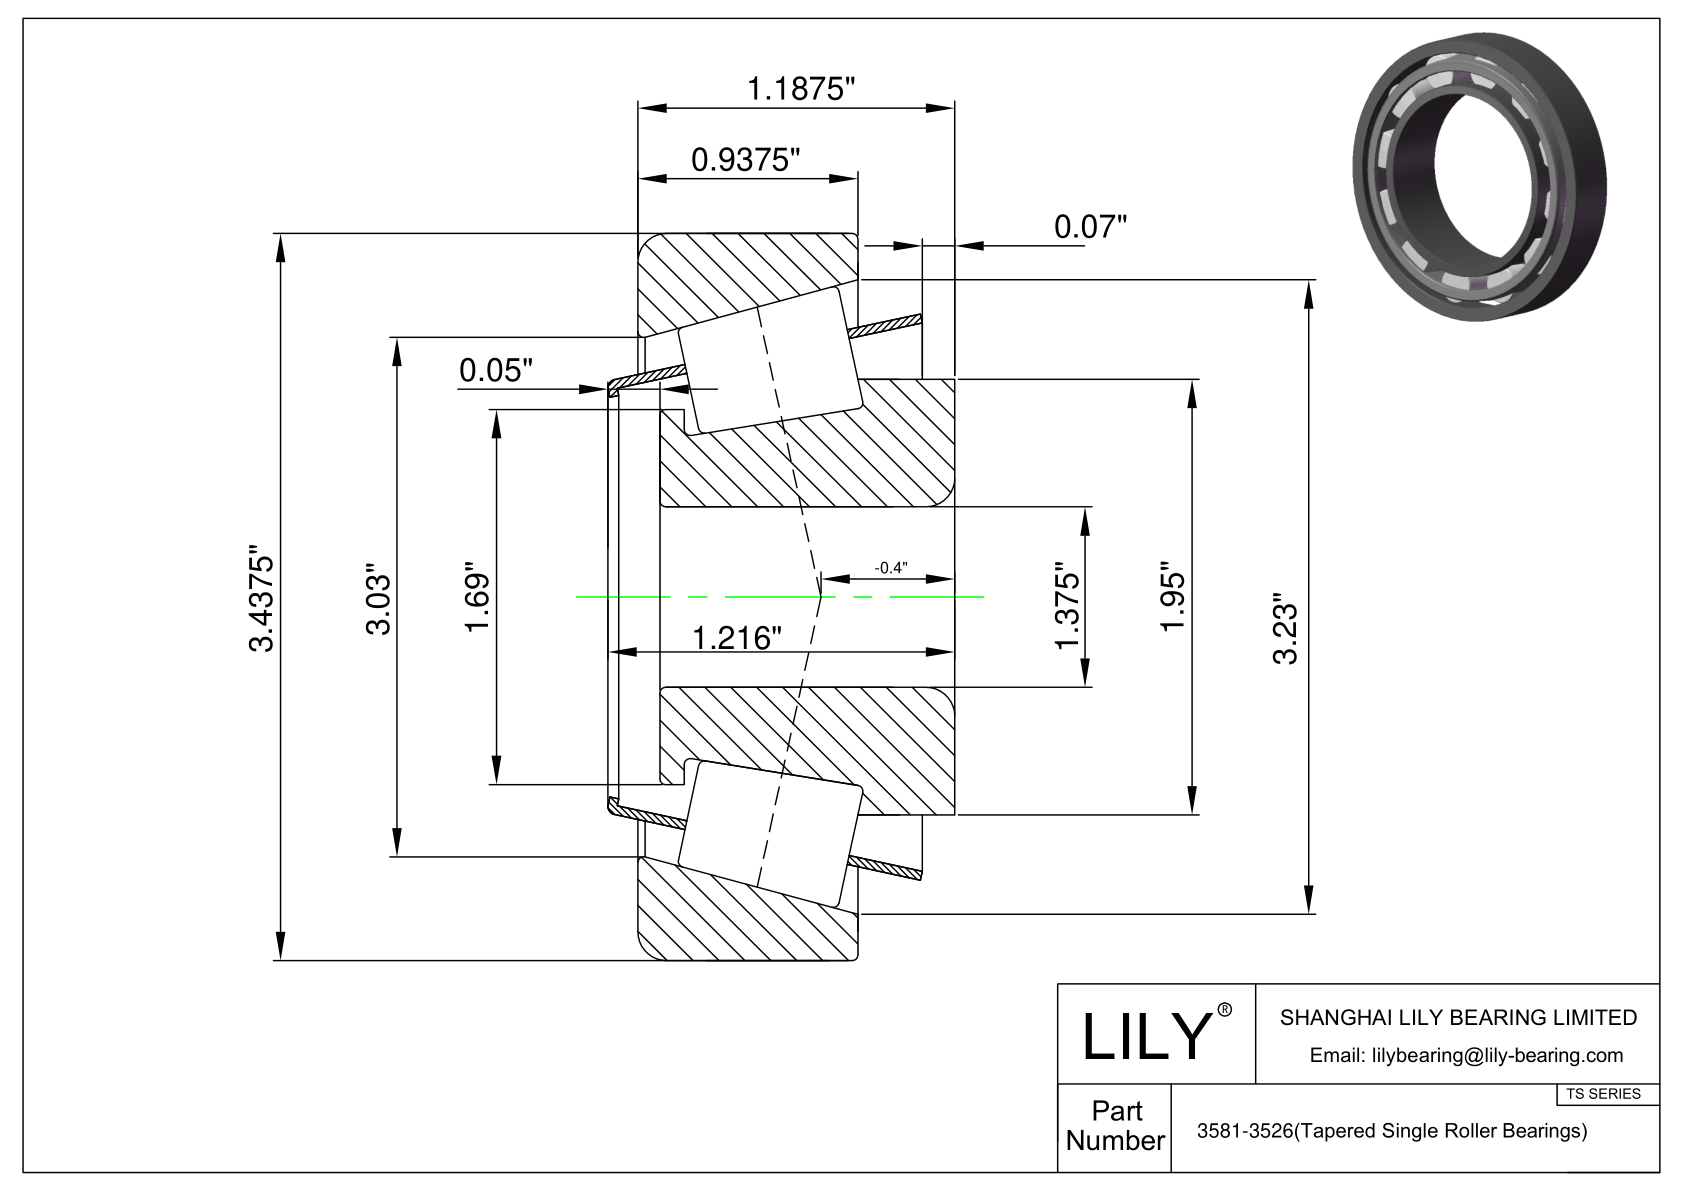 3581-3526 TS (Tapered Single Roller Bearings) (Imperial) cad drawing